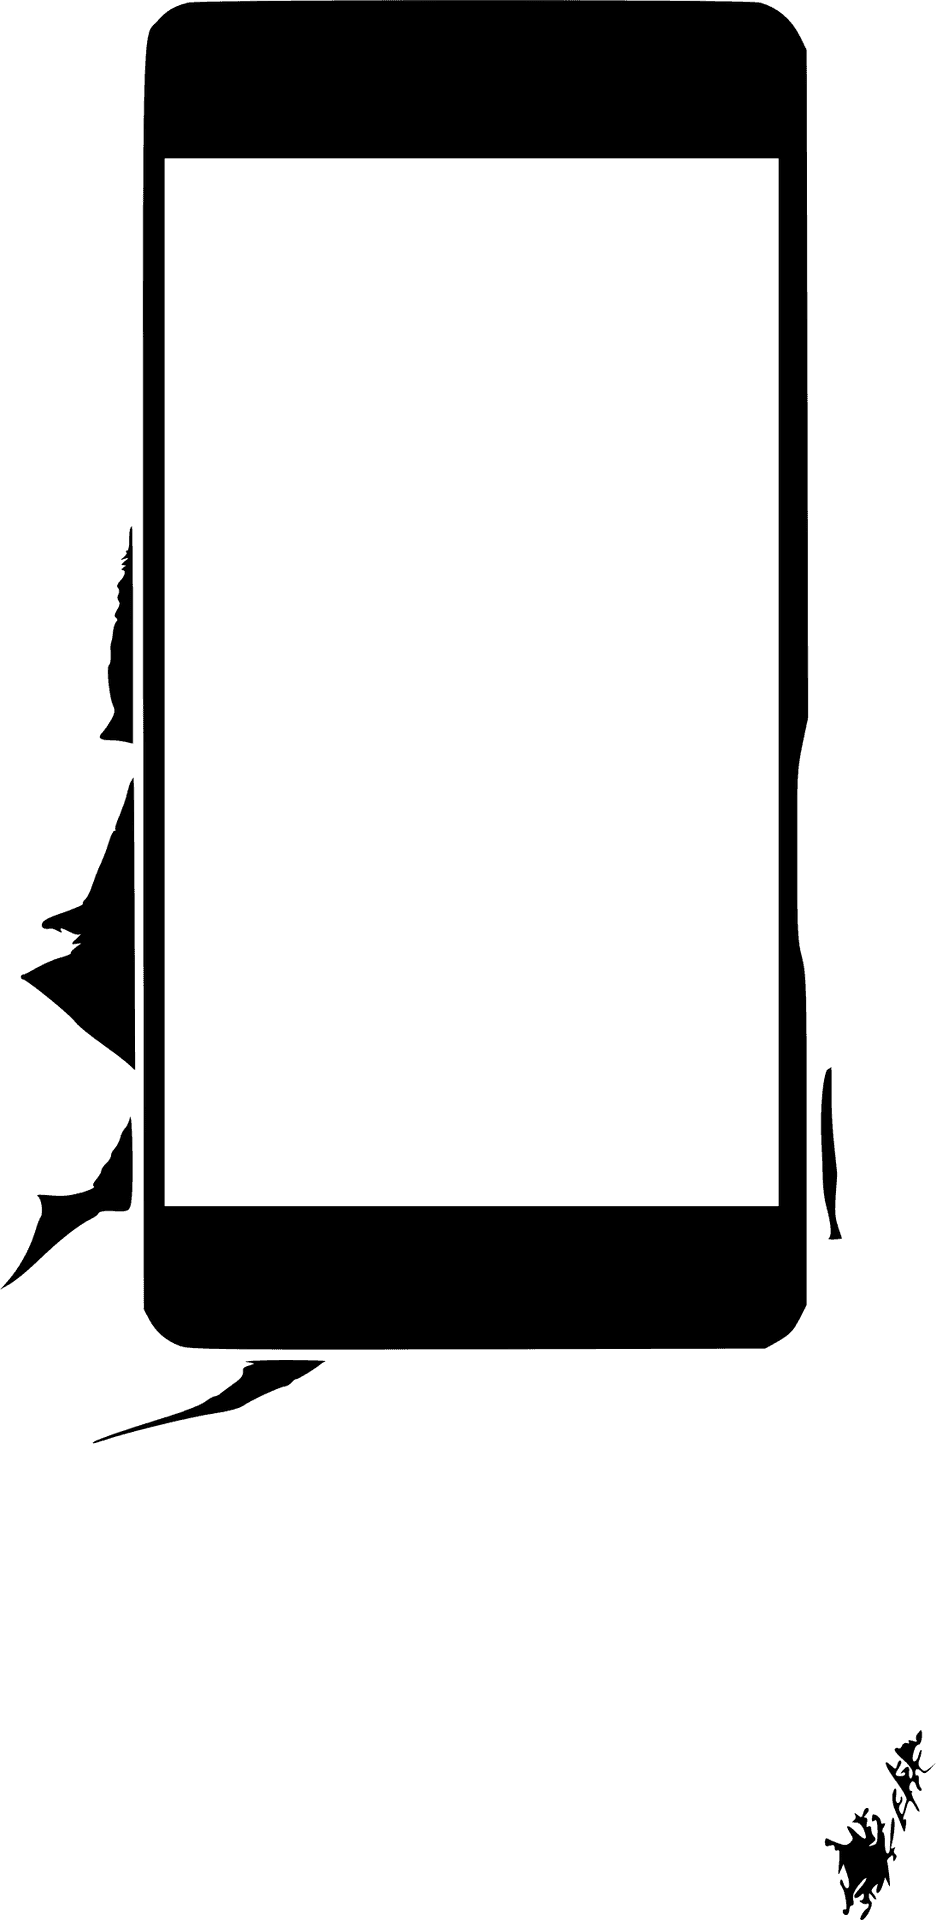 Smartphone In Hand Silhouette PNG image